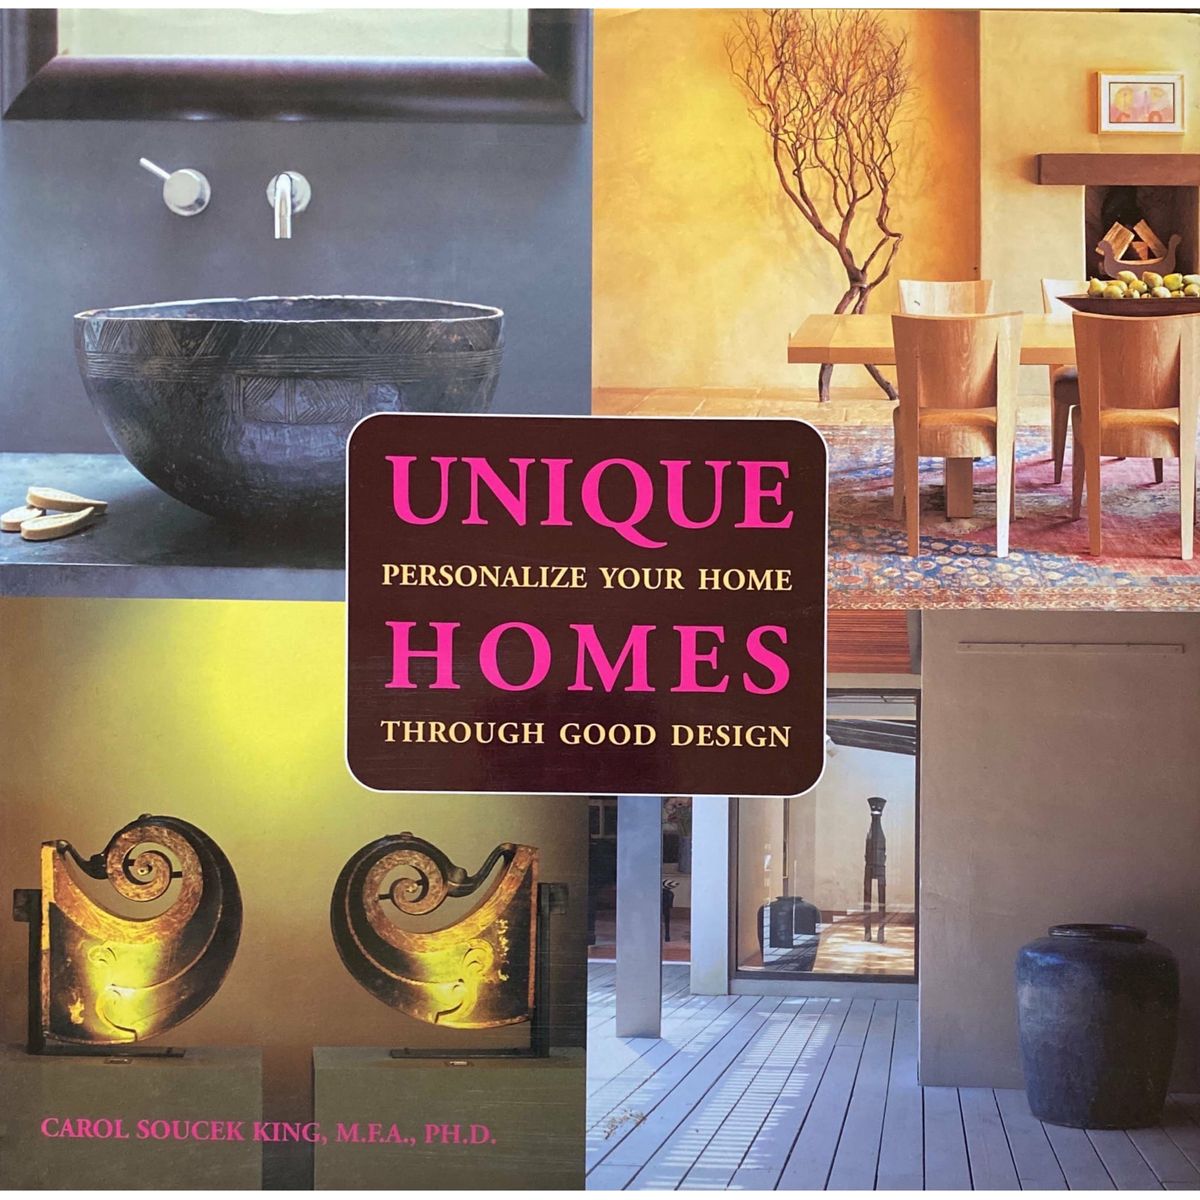 ISBN: 9780060820497 / 0060820497 - Unique Homes: Personalise Your Home Through Good Design by Carol Soucek King [2006]